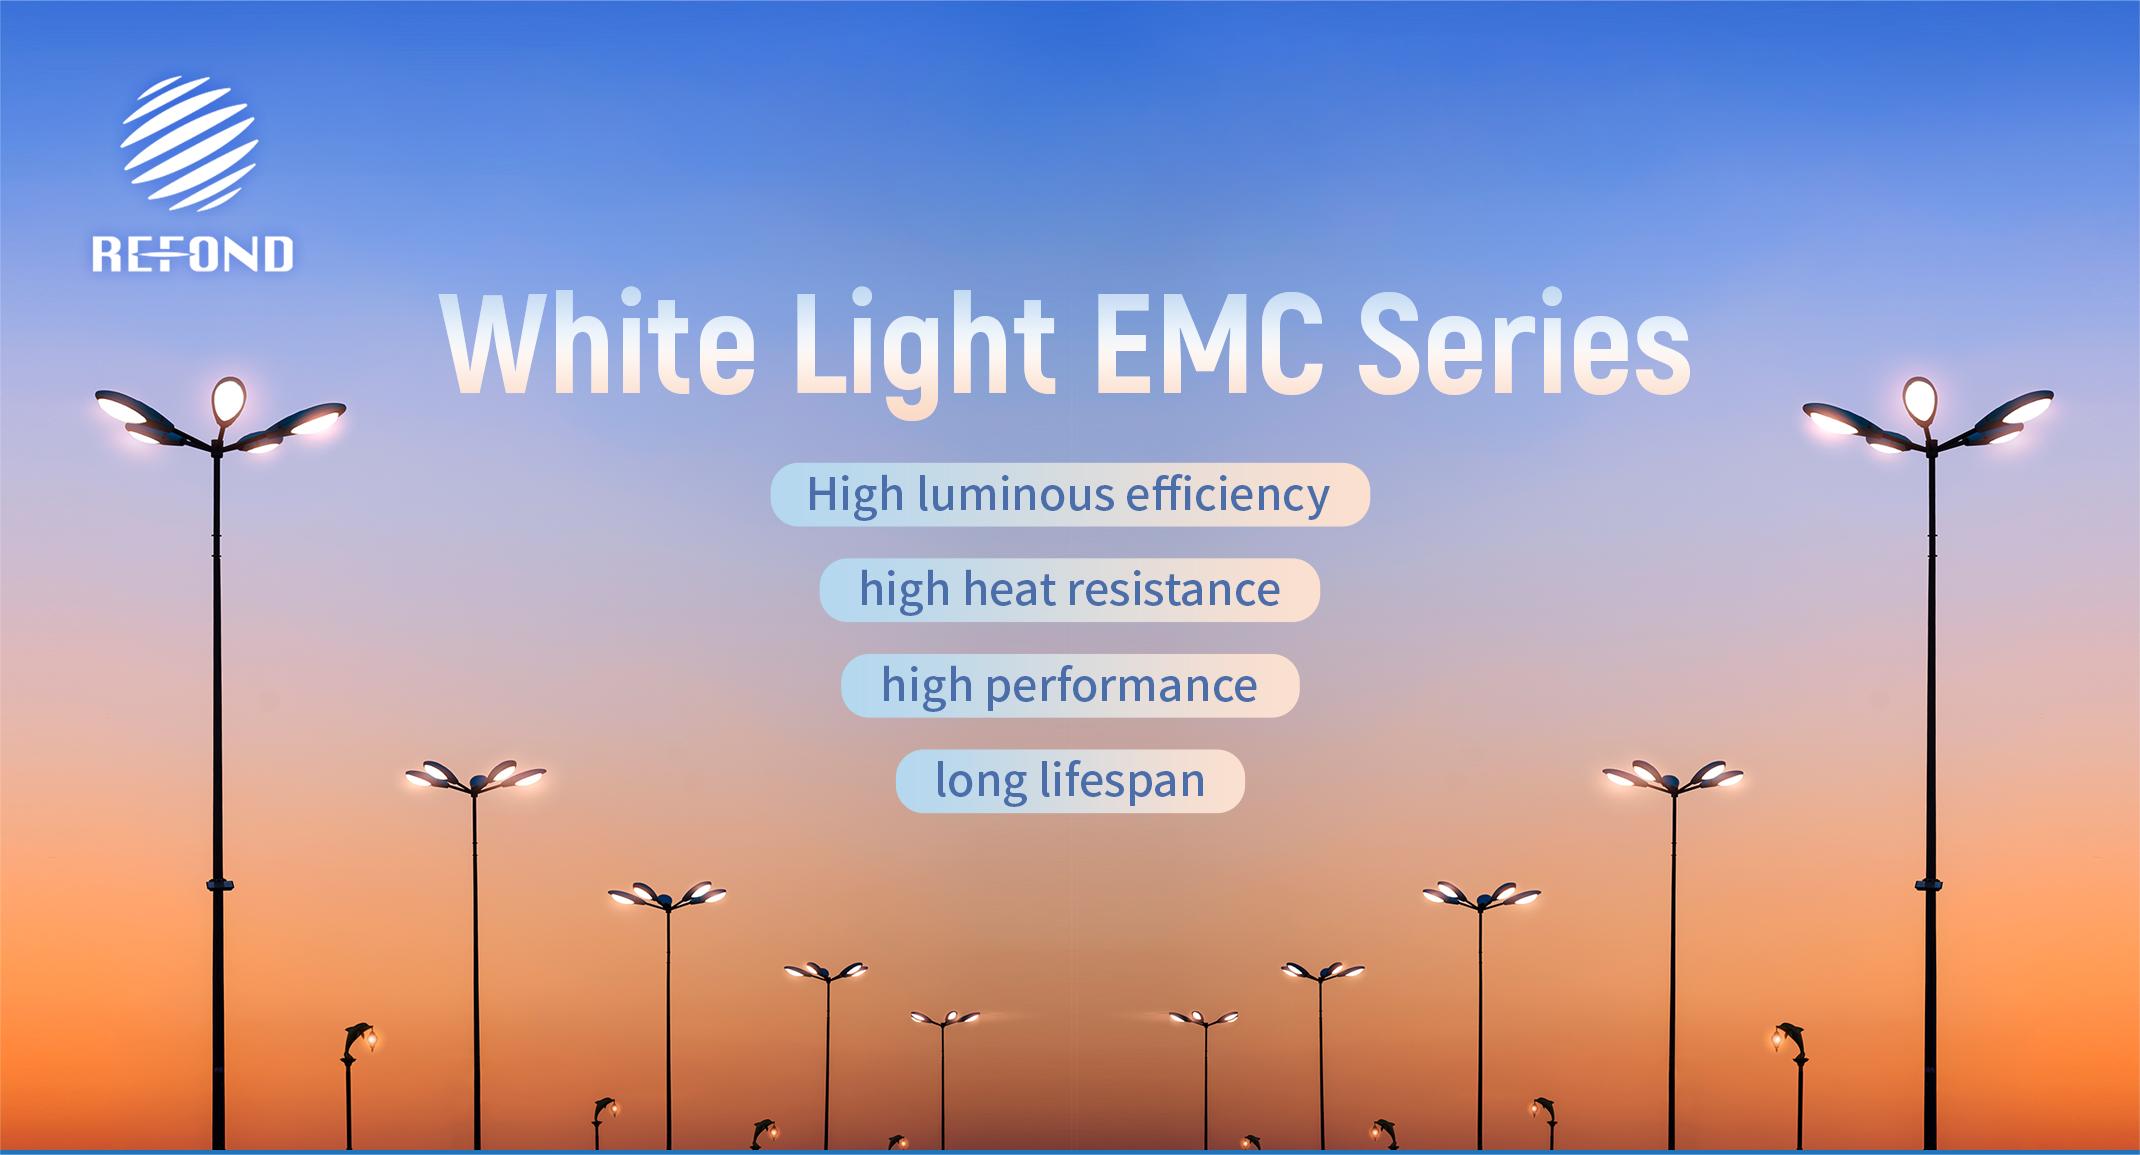 Refond Optoelectronics High Quality EMC LED Light Source Solves Outdoor Lighting Problems